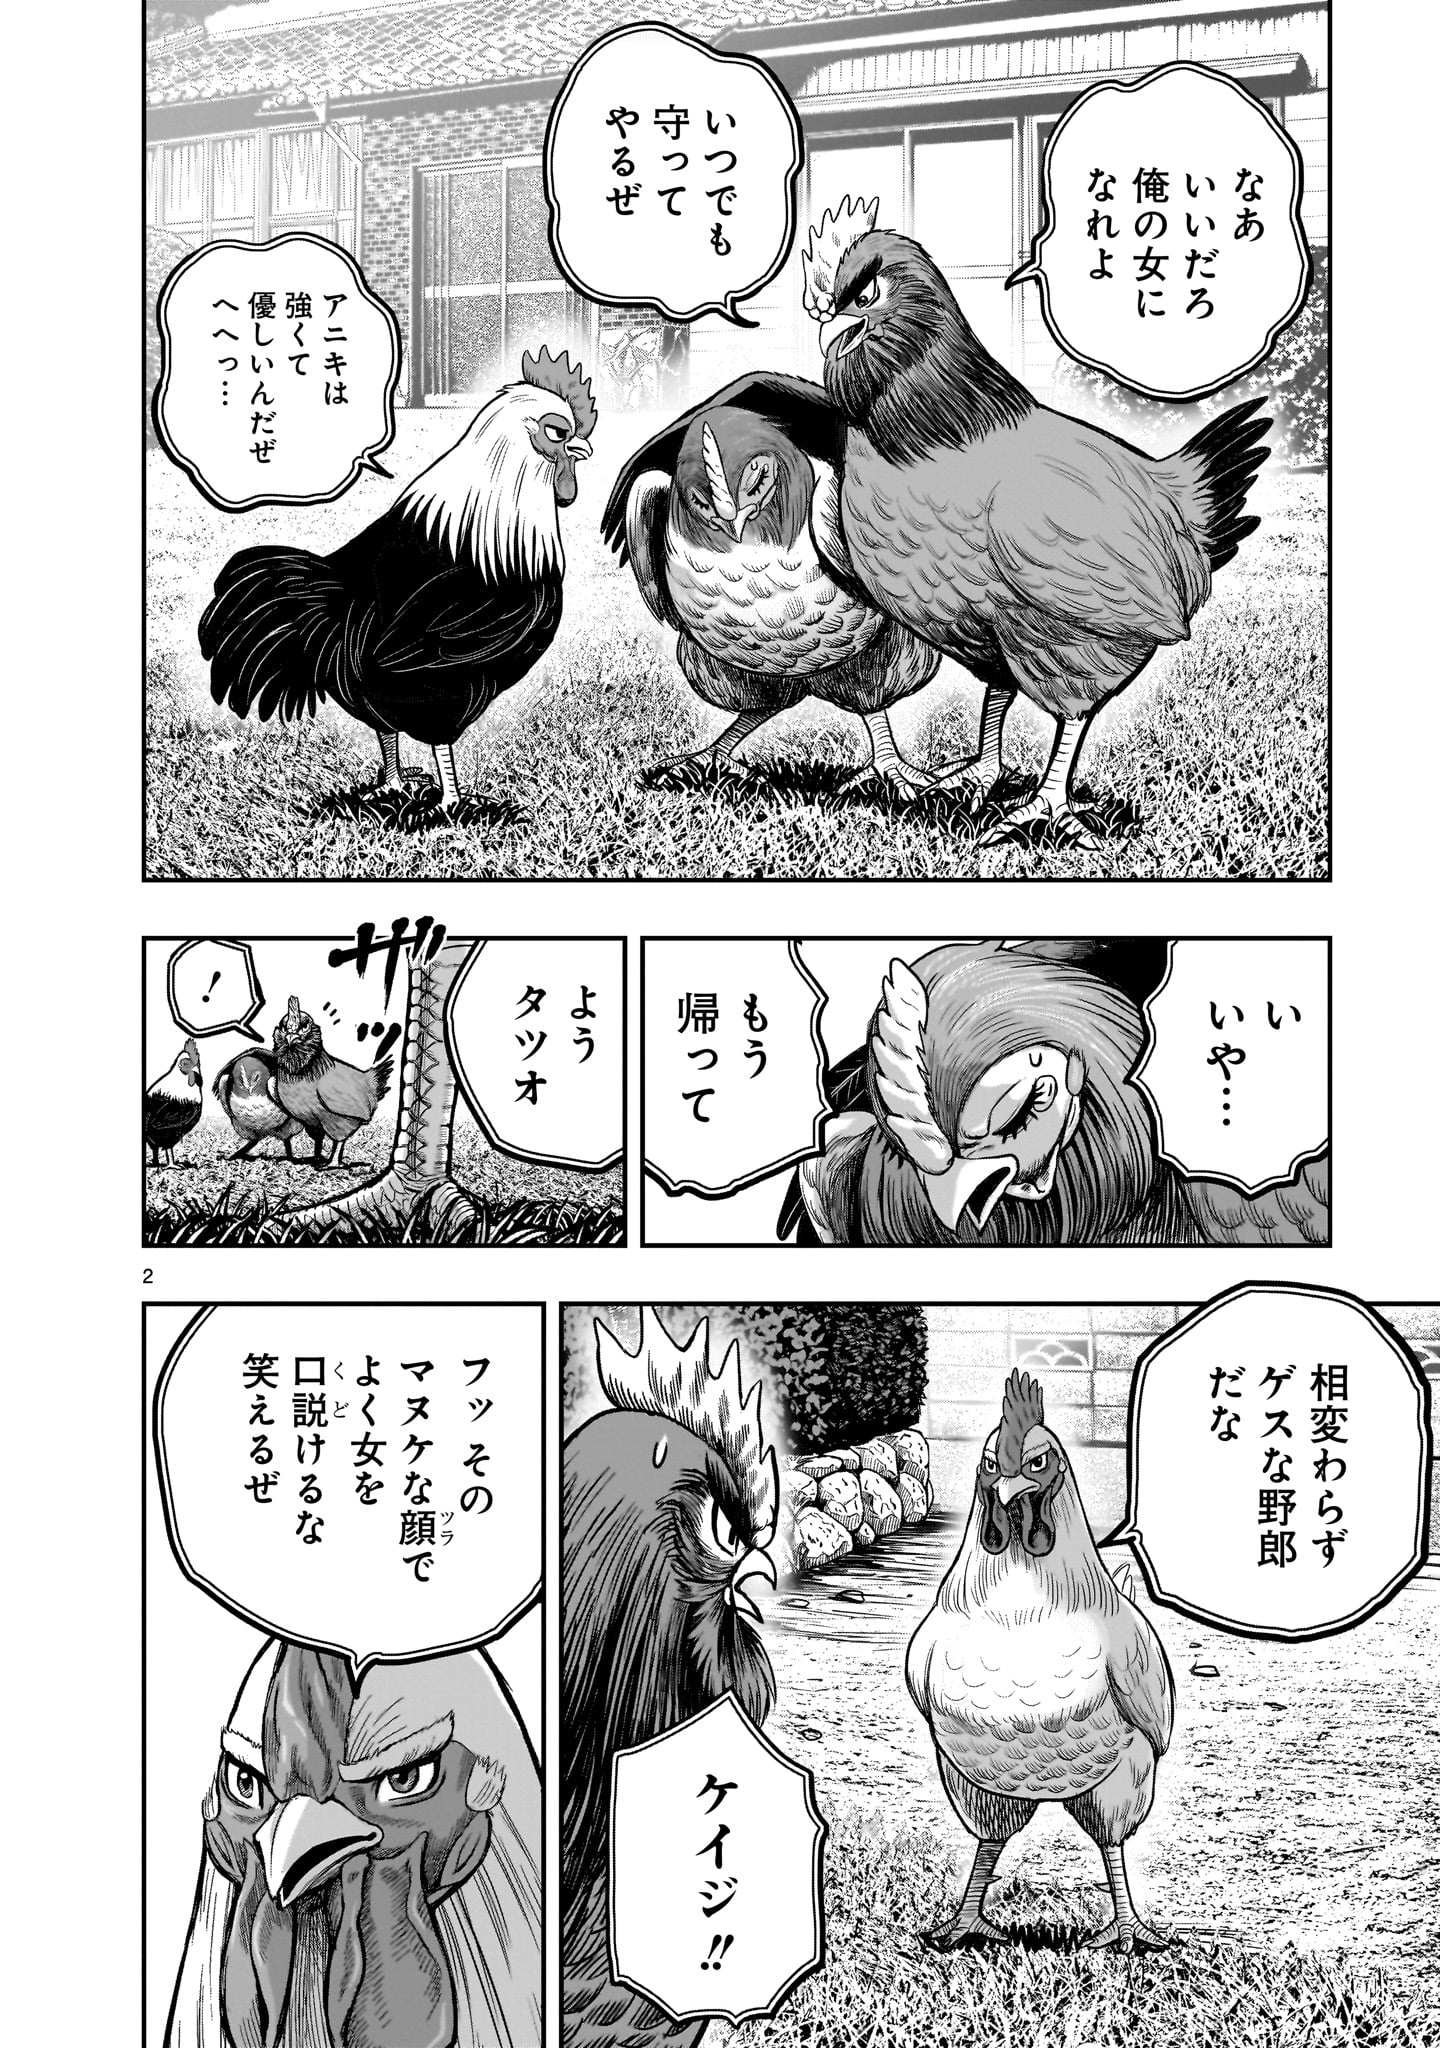 Niwatori Fighter - Chapter 36.5 - Page 2